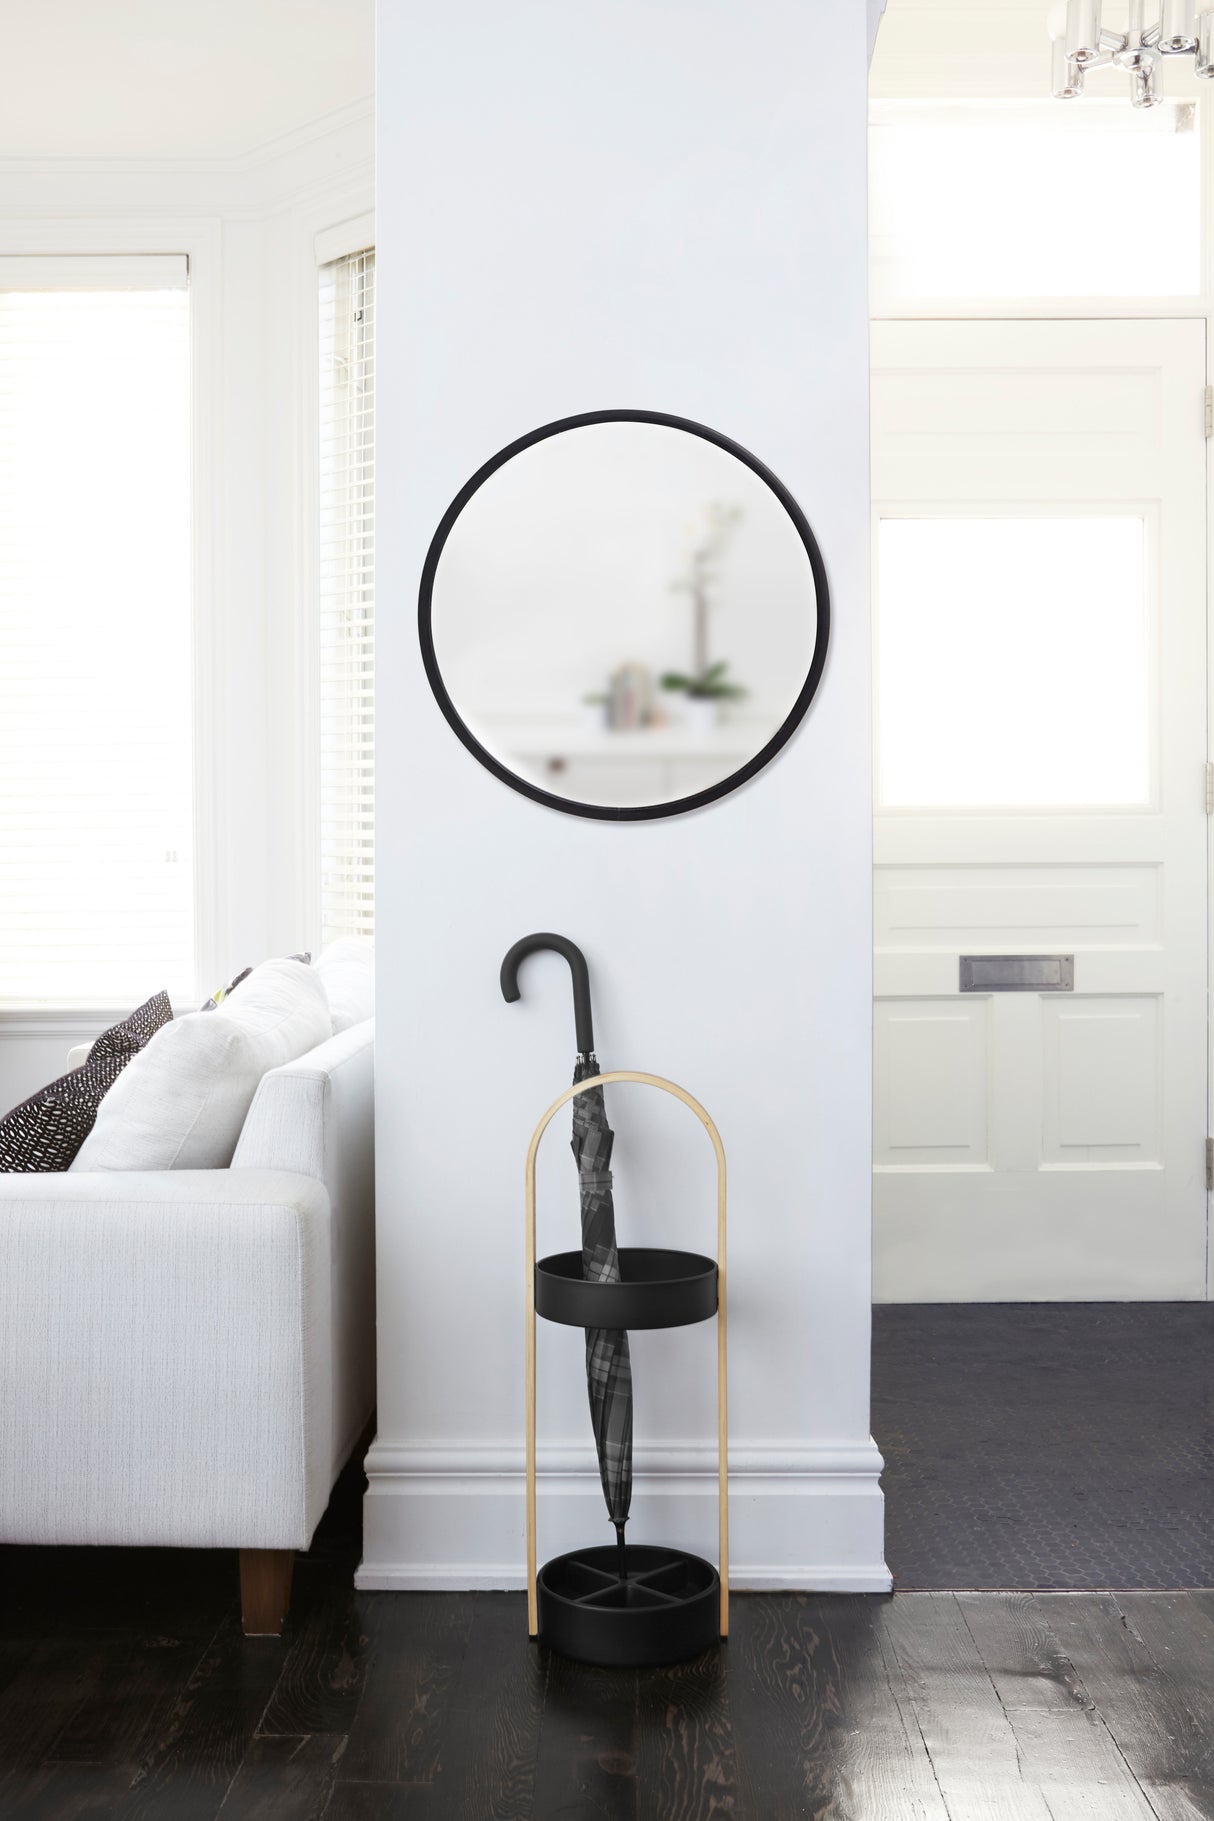 Black Circle Wall Mirror 24 inch Round Wall Mirror, Hanging Round Wall Mirror Modern Decorative for Entryways, Washrooms, Living Rooms, Bedroom